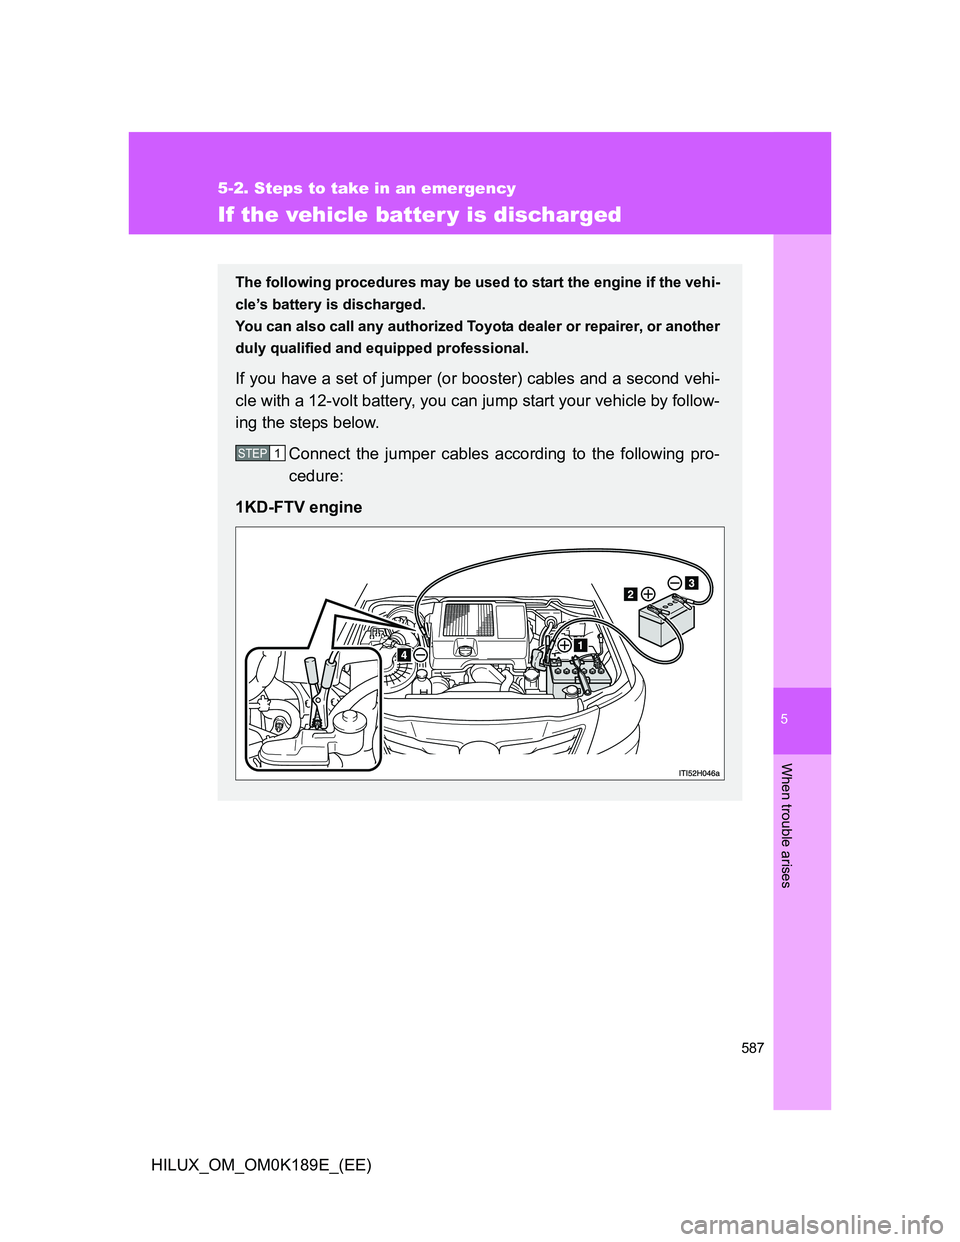 TOYOTA HILUX 2013  Owners Manual (in English) 5
587
5-2. Steps to take in an emergency
When trouble arises
HILUX_OM_OM0K189E_(EE)
If the vehicle batter y is discharged
The following procedures may be used to start the engine if the vehi-
cle’s 